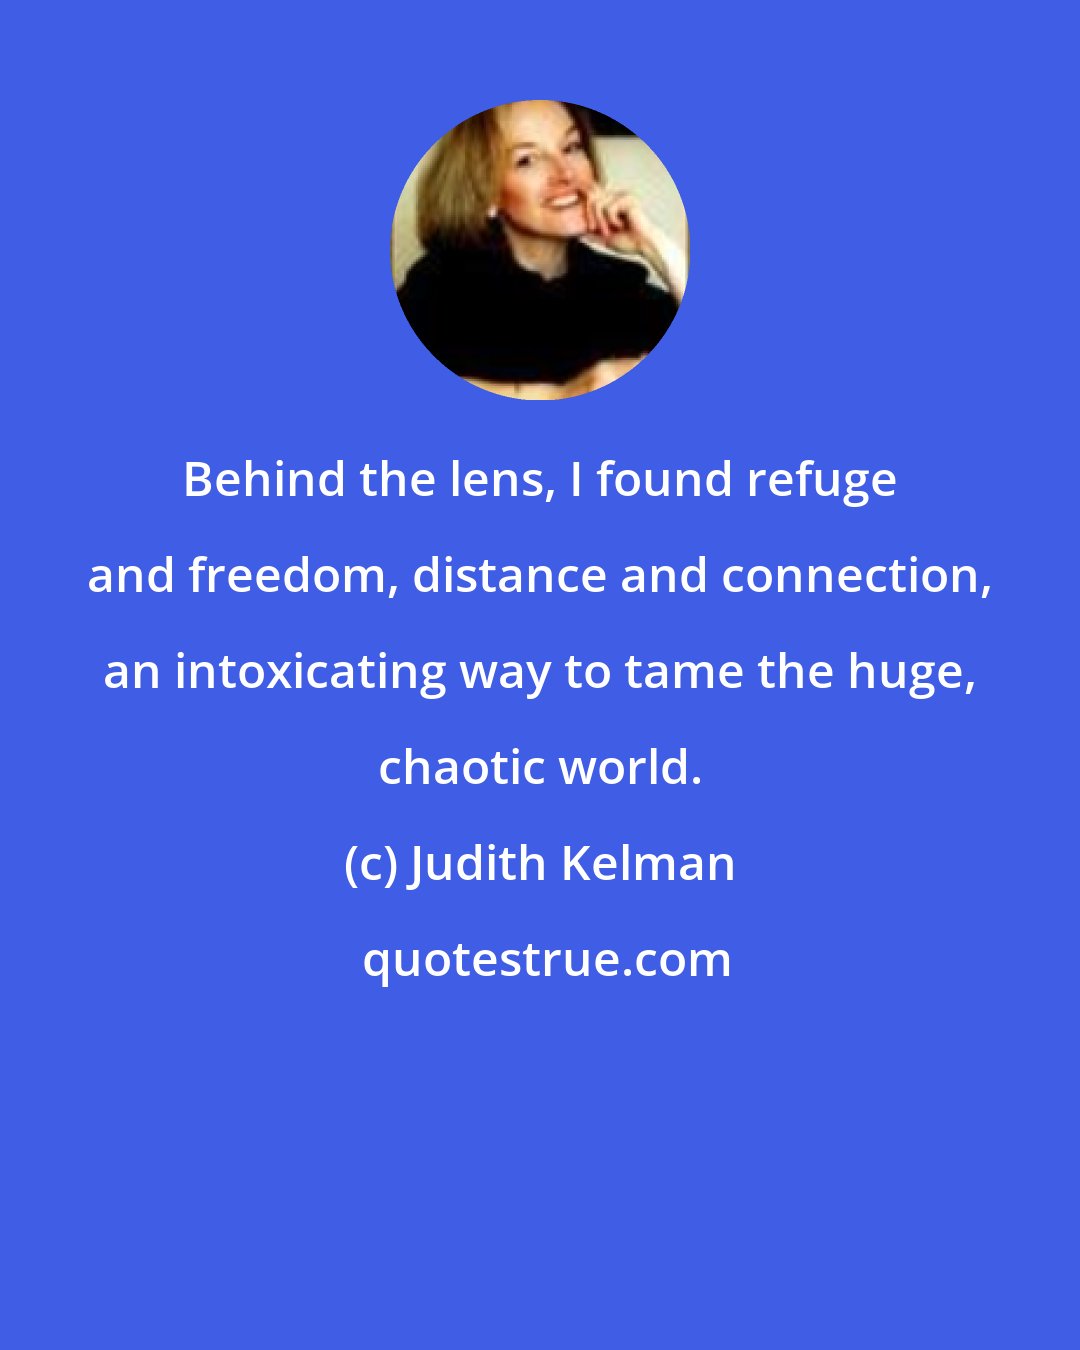 Judith Kelman: Behind the lens, I found refuge and freedom, distance and connection, an intoxicating way to tame the huge, chaotic world.